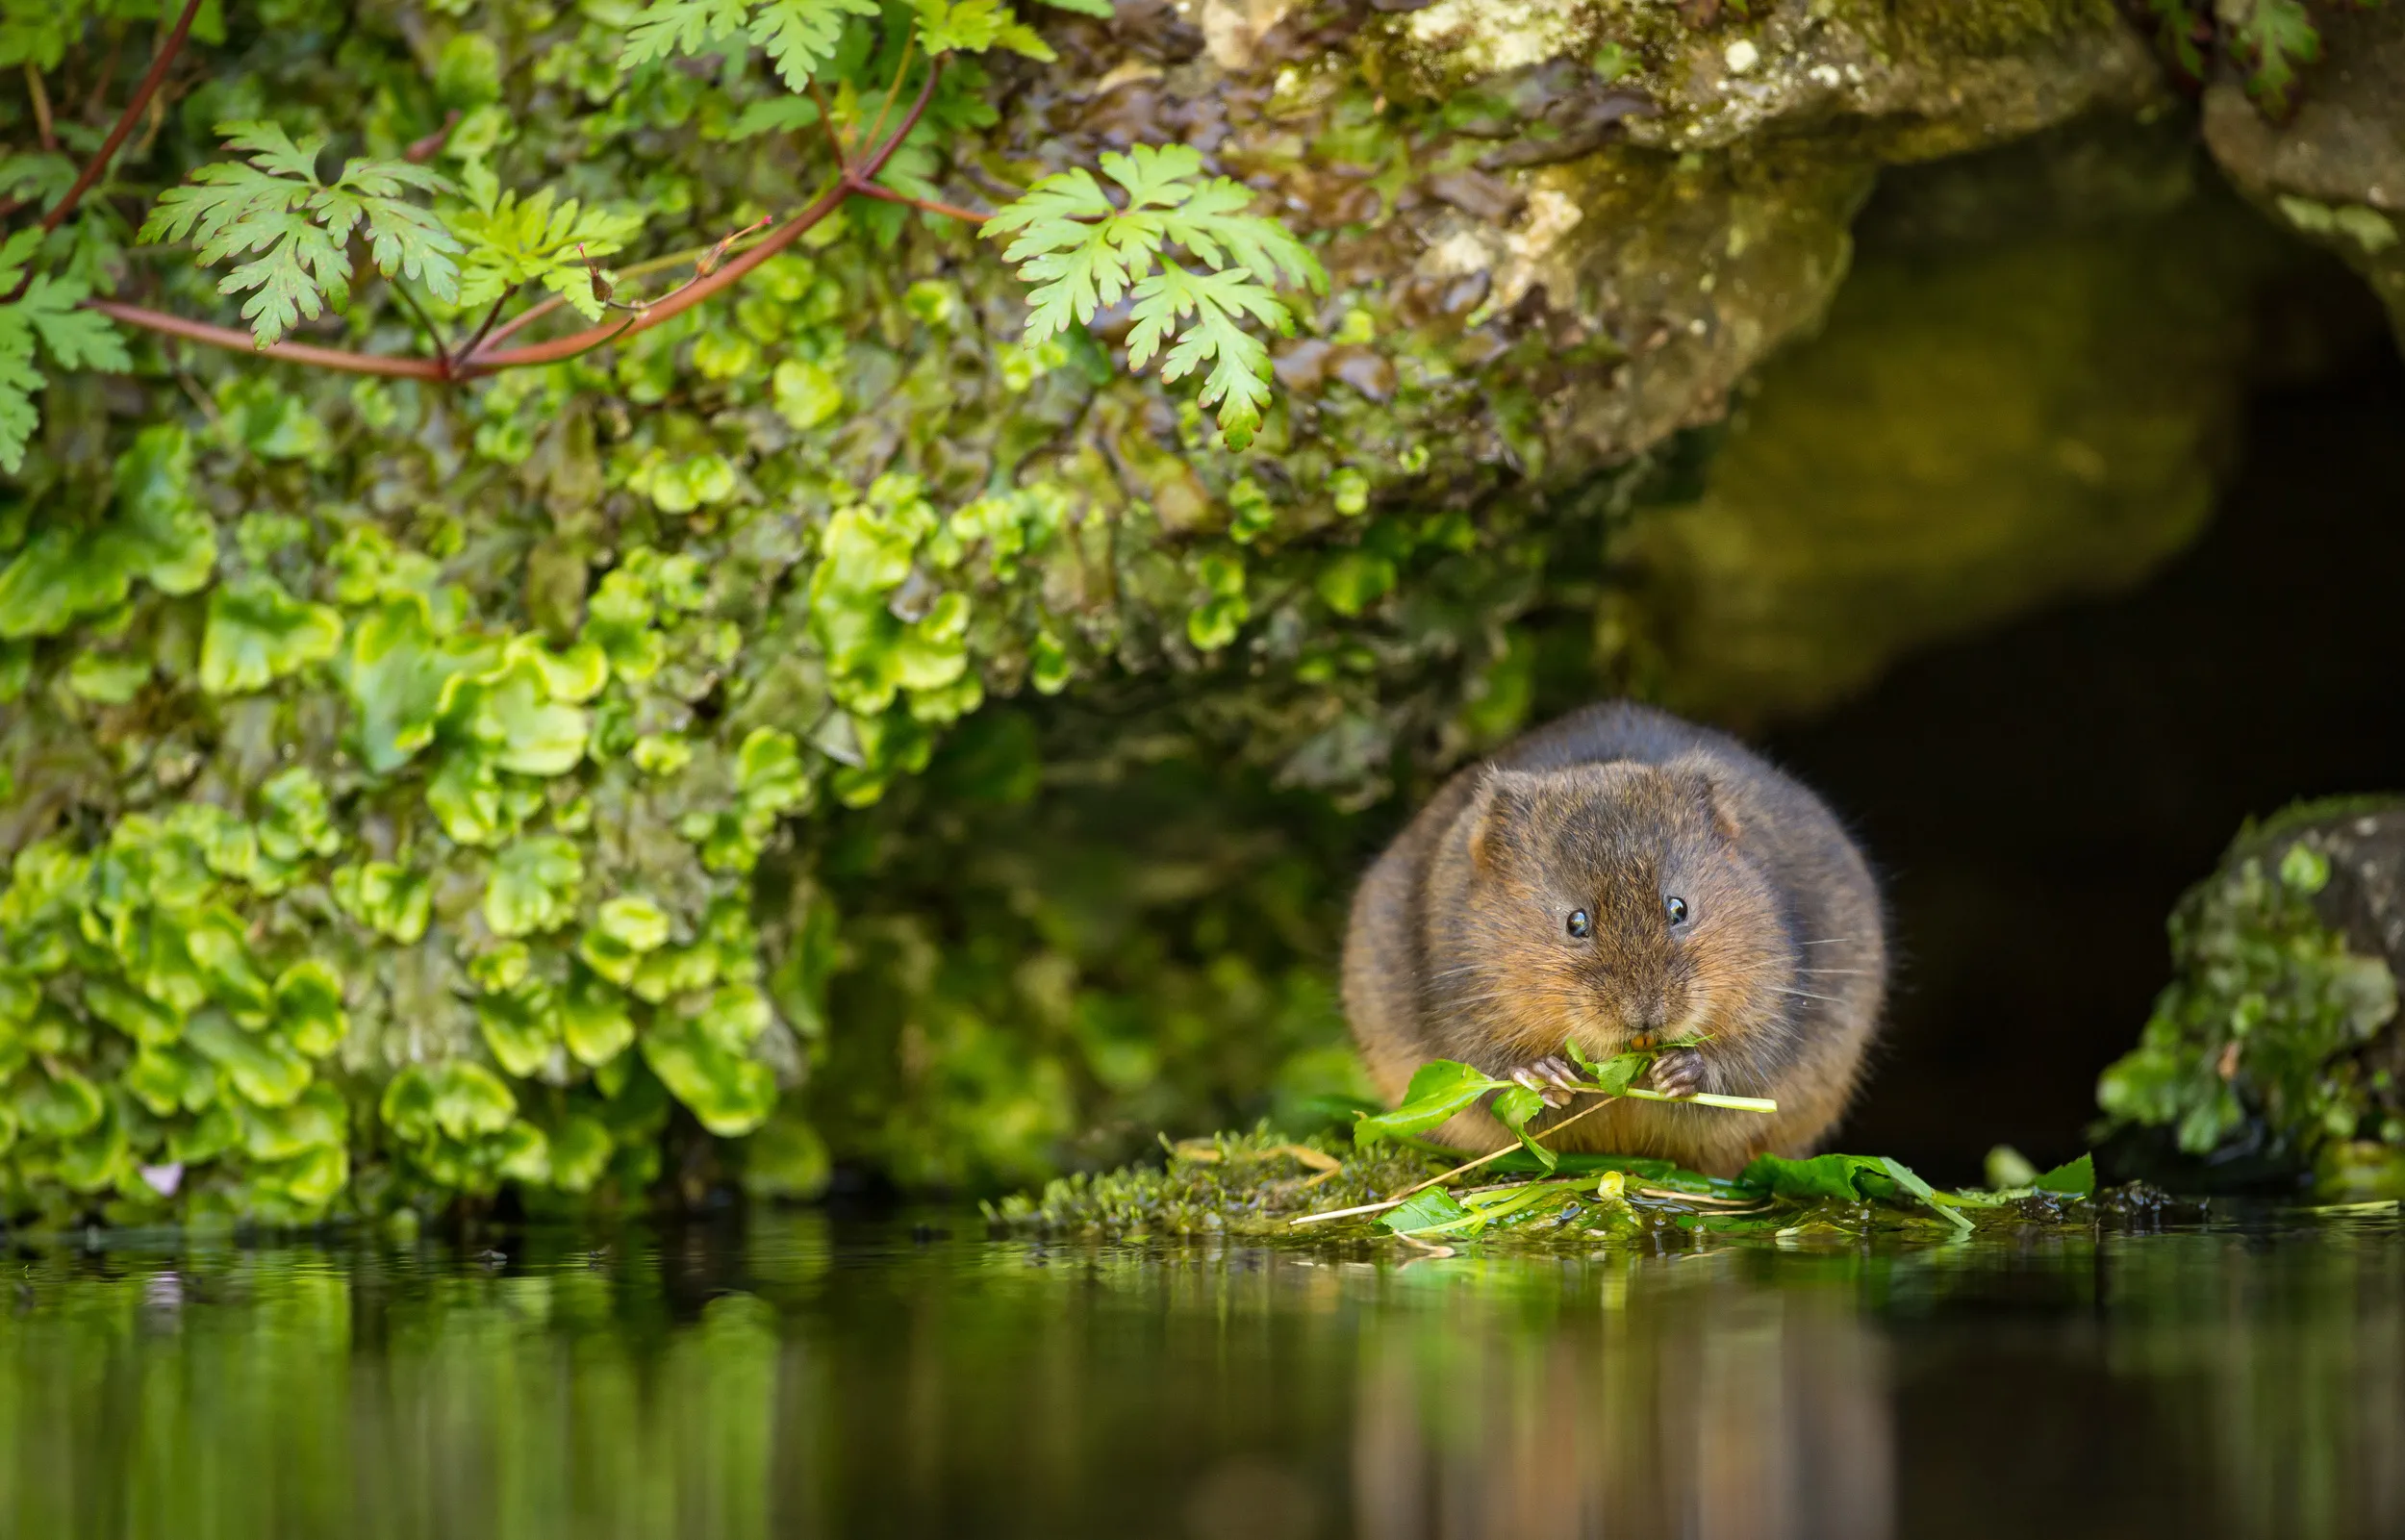 A lone Water Vole perched on the edge of a body of water surrounded by greenery eating leaves.